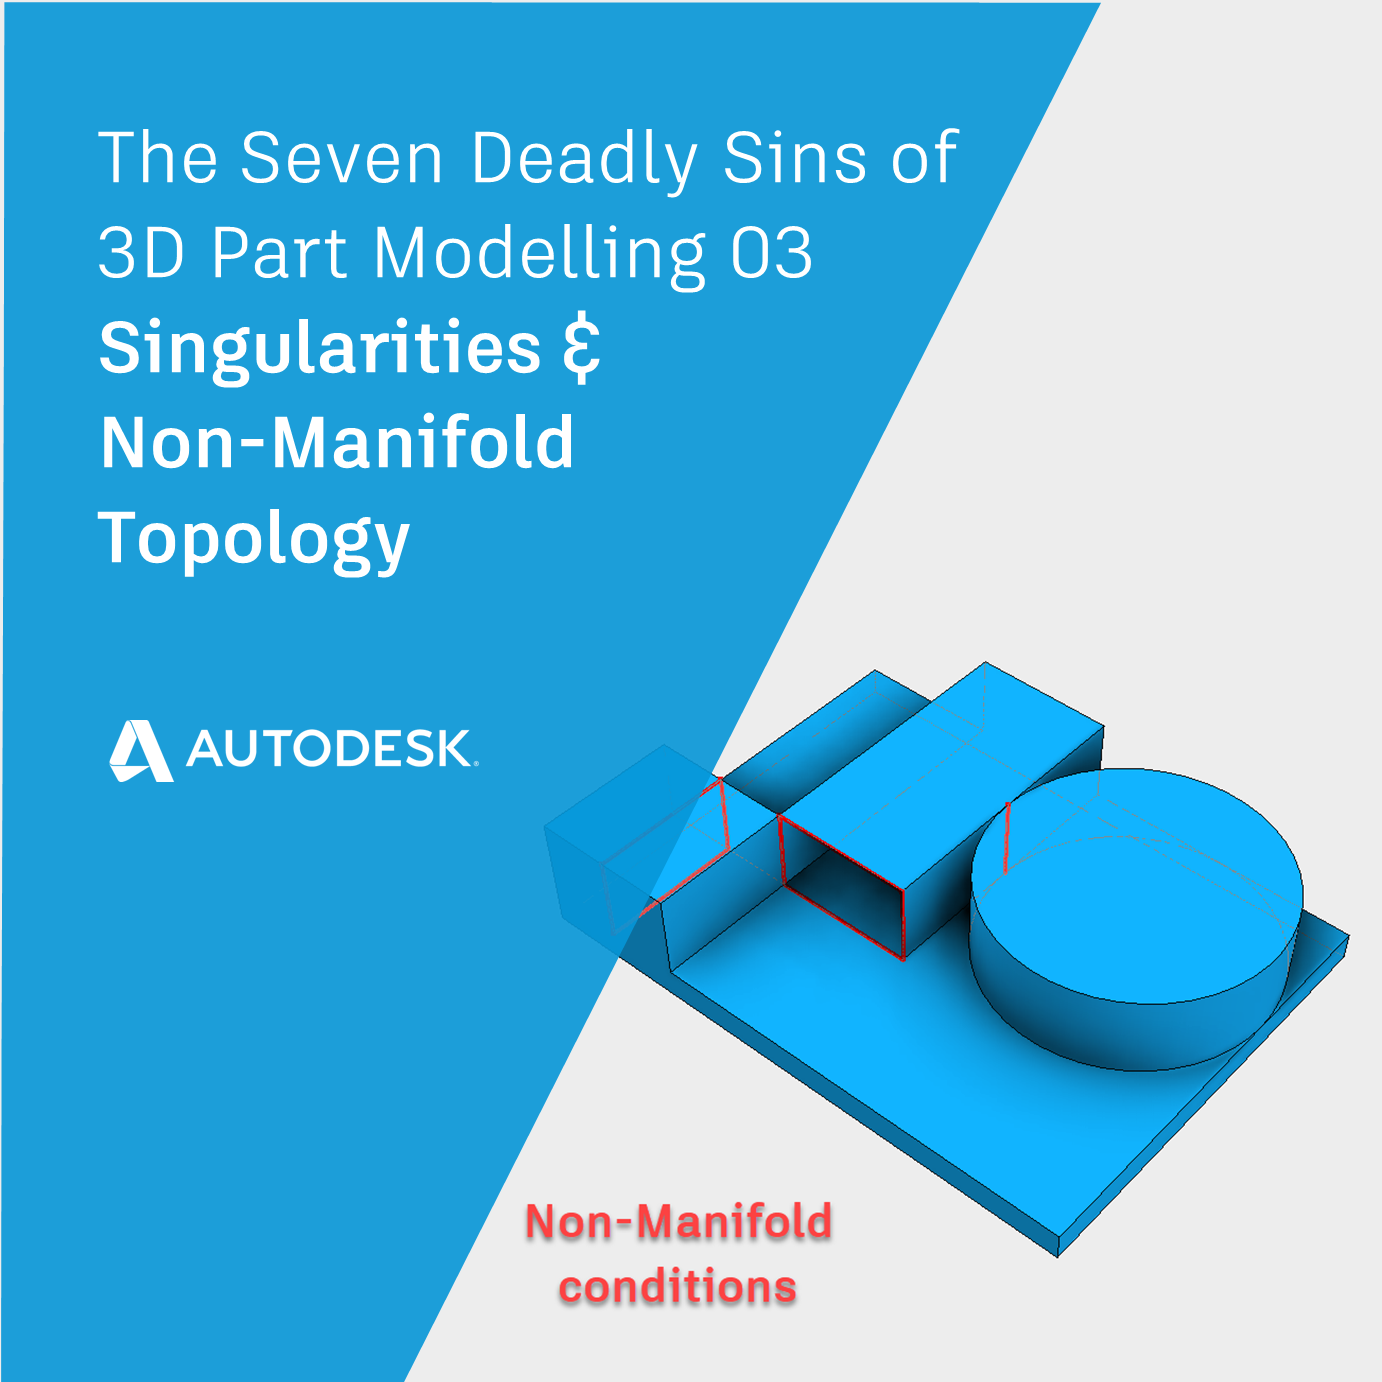 Singularities and Non-Manifold Topology | The Seven Deadly Sins of 3D Part Modeling 03